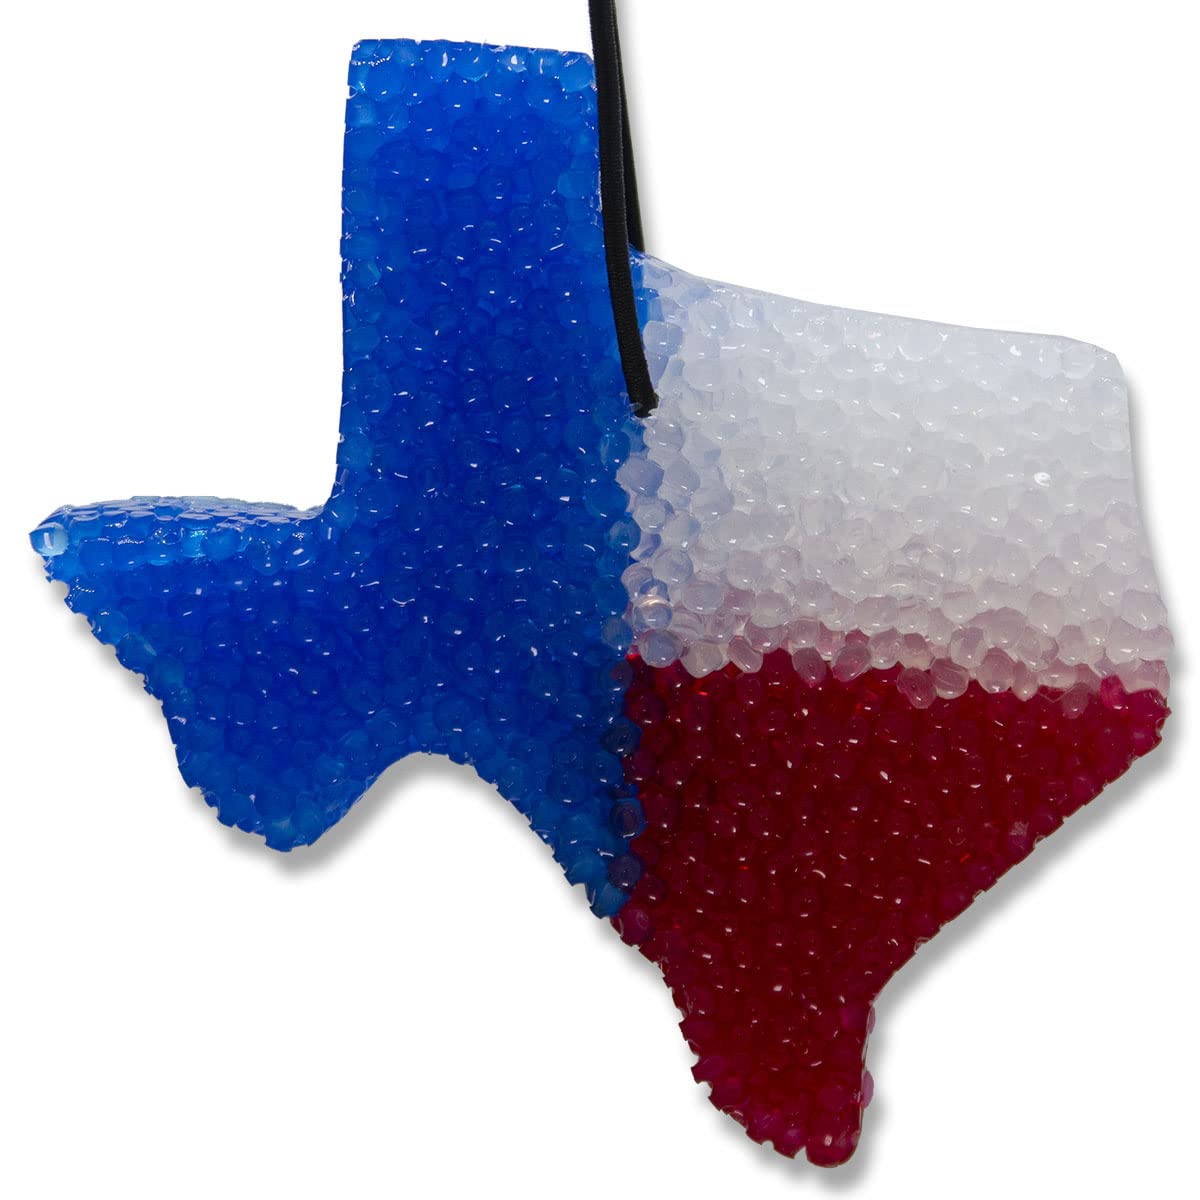 Strawberry Leather, Lone Star Candles & More’s Premium Strongly Scented Freshies, Genuine Leather with Sweet & Juicy Strawberries, Car & Air Freshener, USA Made in Texas, 3-Color Texas State 1-Pack